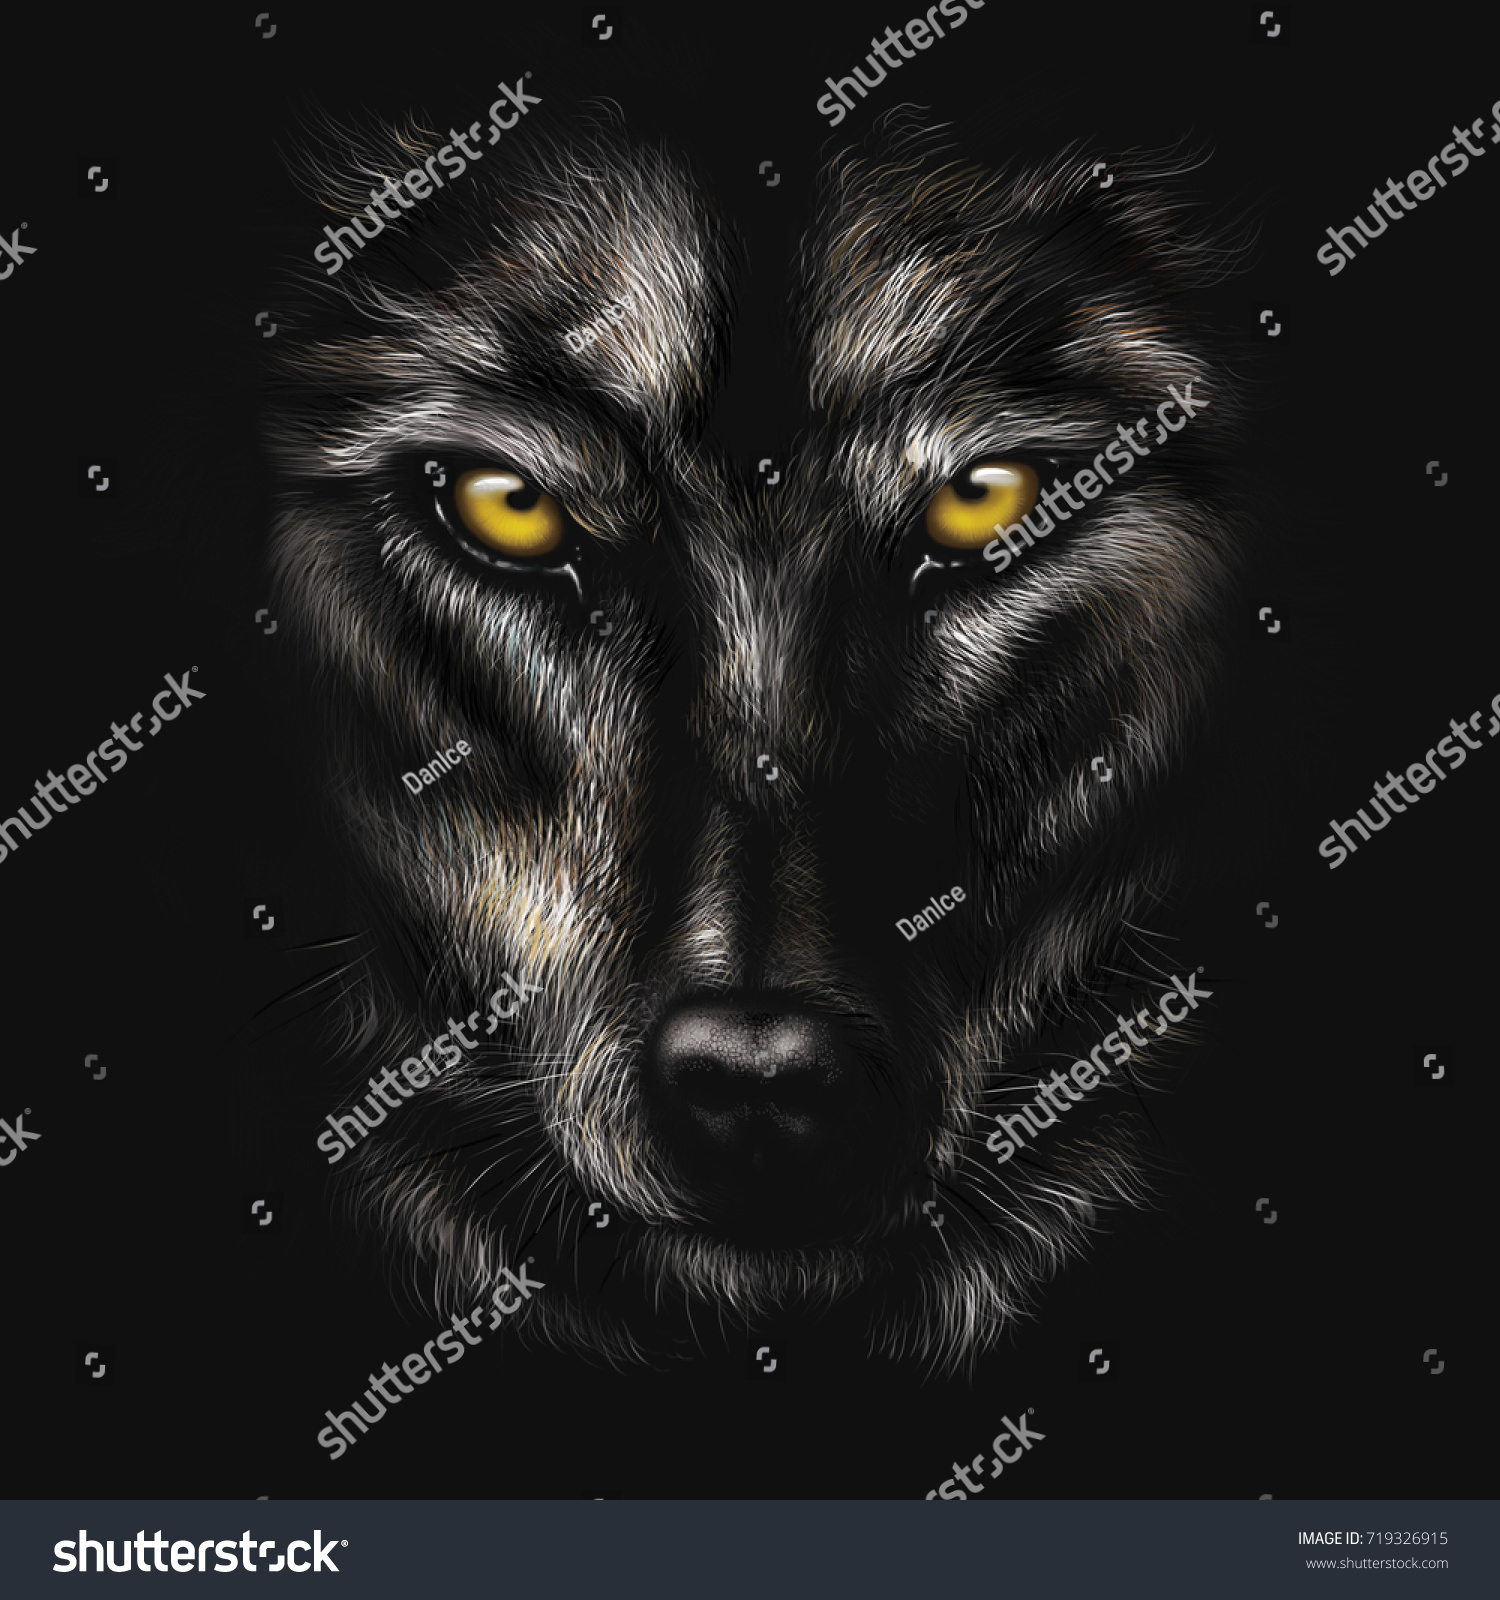 9,383 Wolf eyes Stock Illustrations, Images & Vectors | Shutterstock